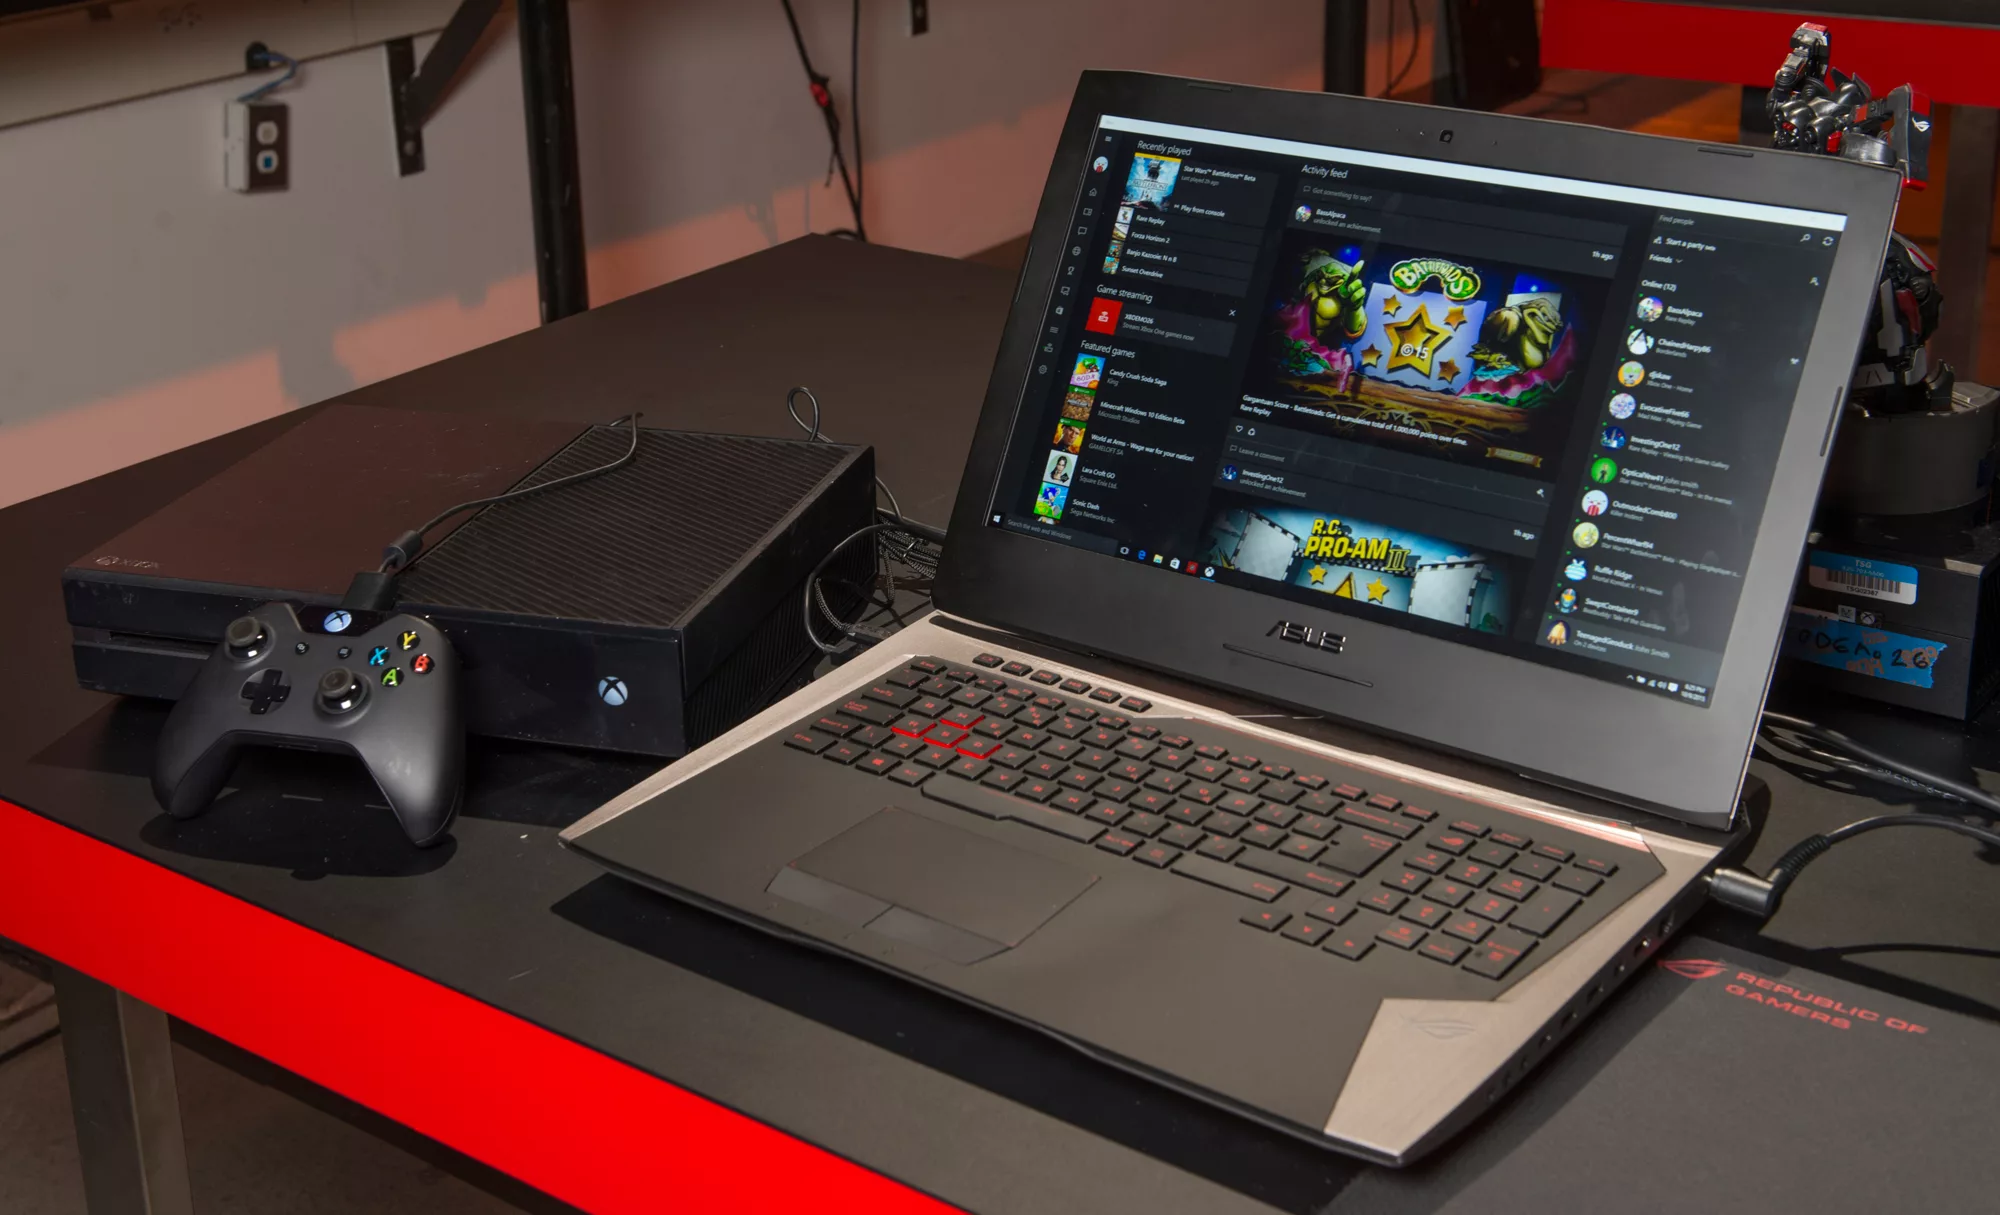 Hedendaags indruk Absorberend Play XBOX Games On Your ROG Laptop or Desktop | ROG - Republic of Gamers  Global